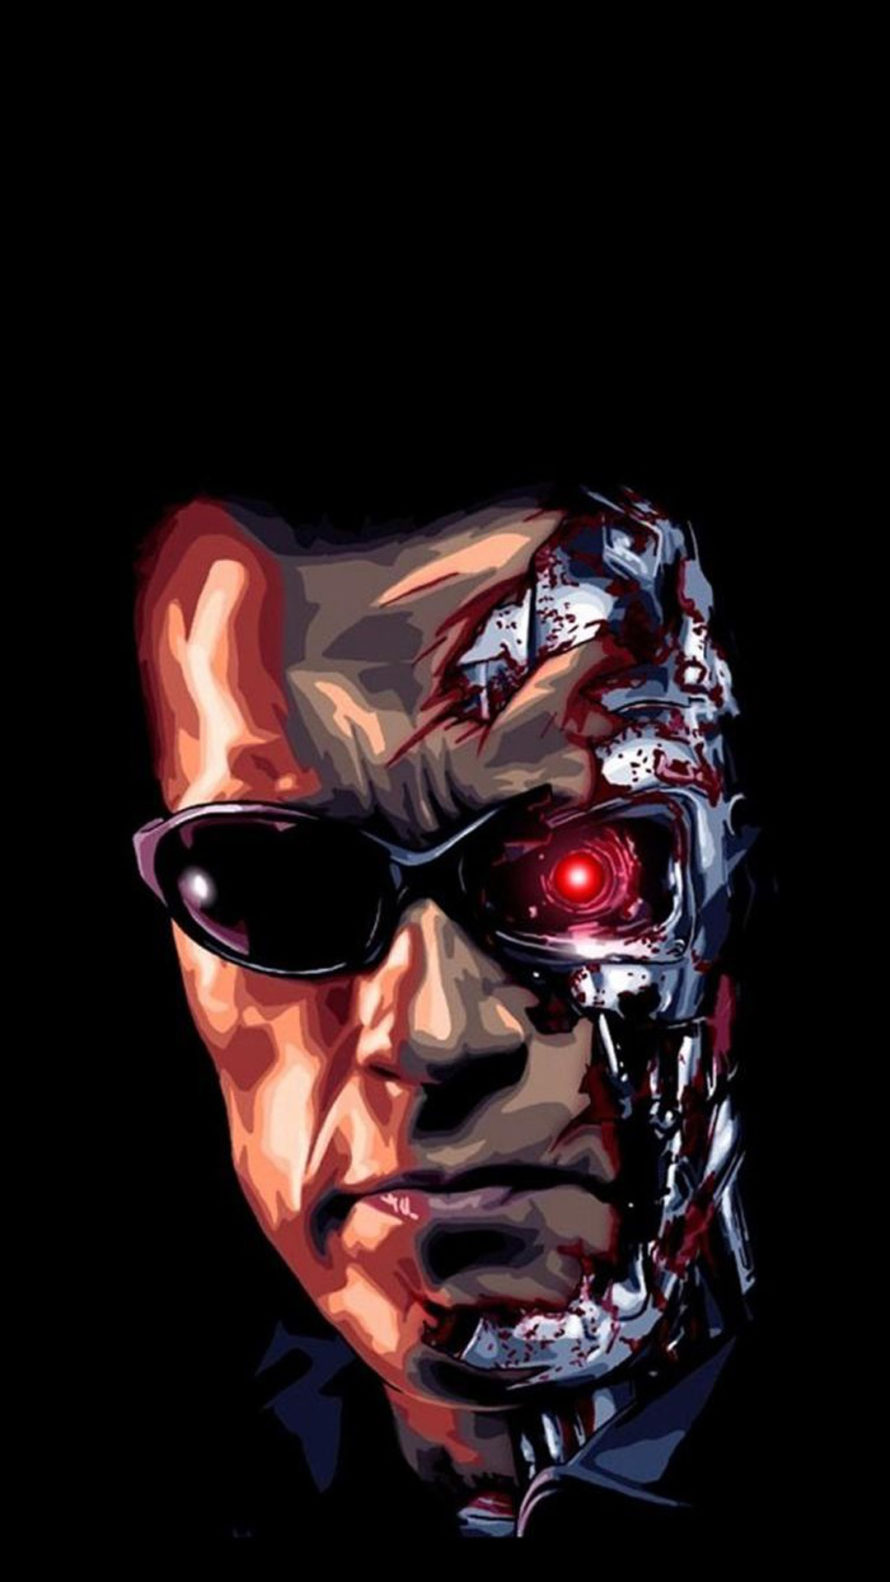 Terminator Hd Wallpaper For Android - 890x1582 Wallpaper 